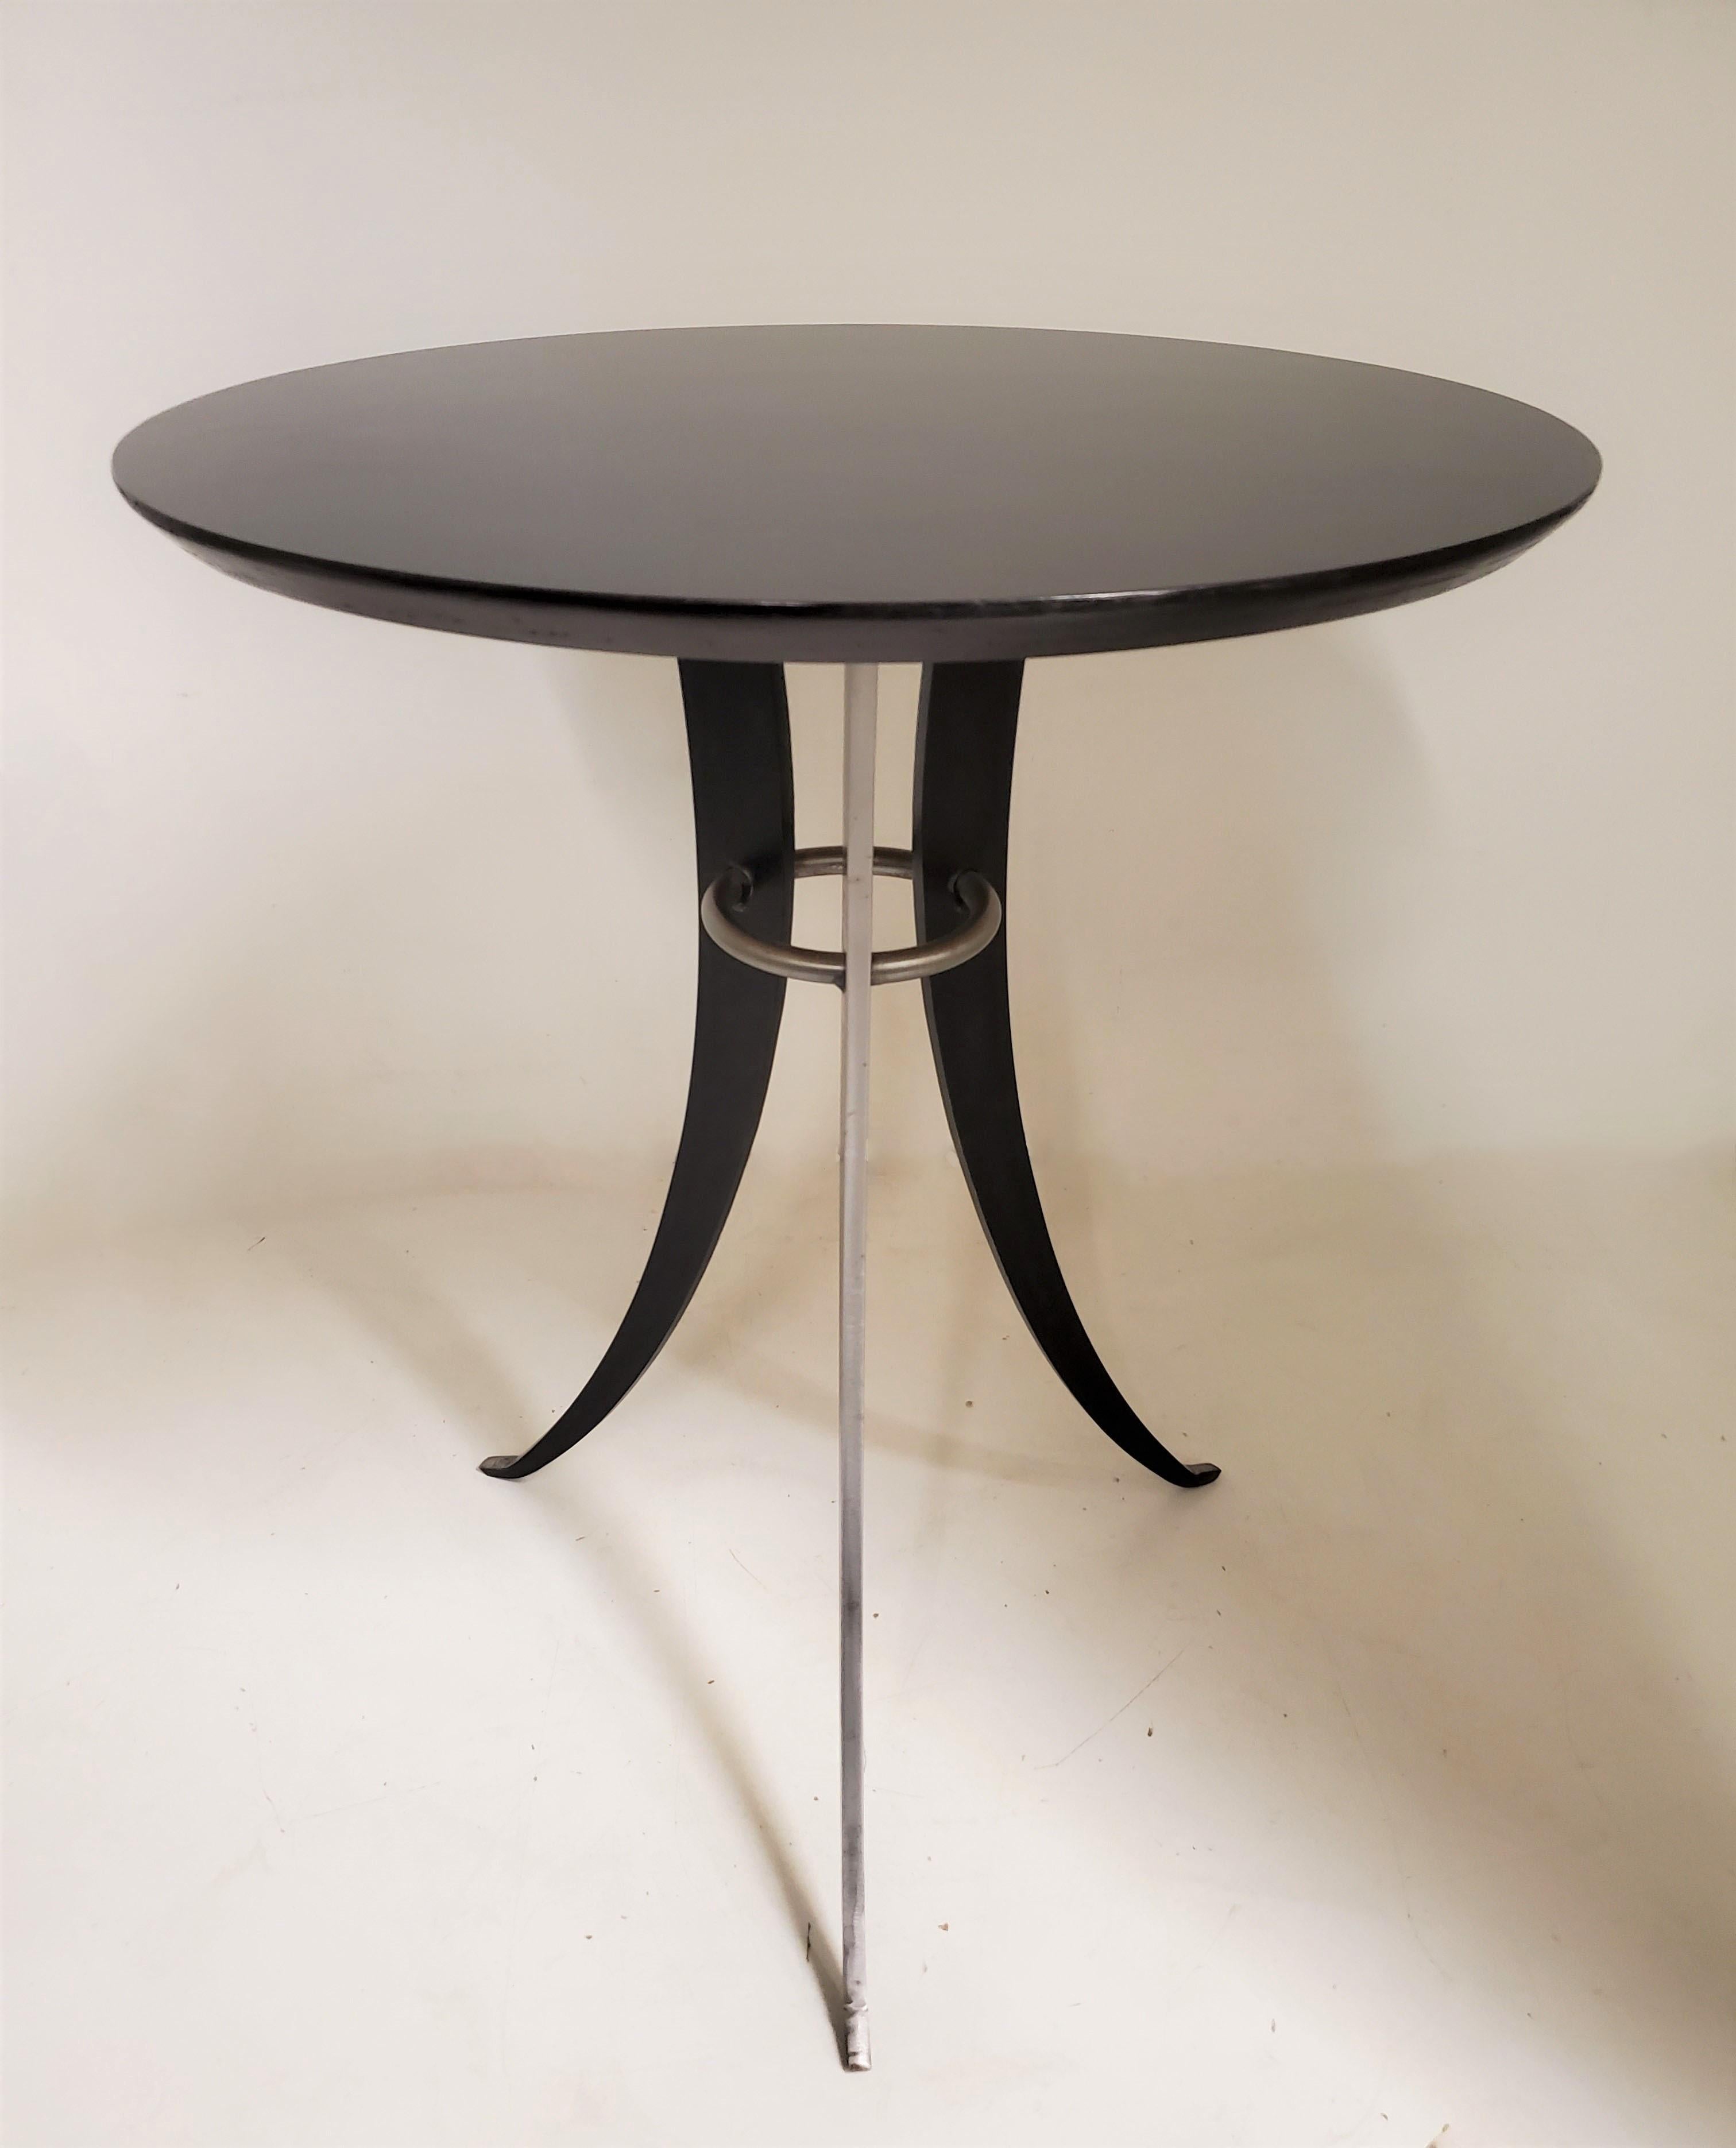 Pair of Steel and Ebonized Wood Circular Tables, Style of Osvaldo Borsani In Good Condition For Sale In New York City, NY